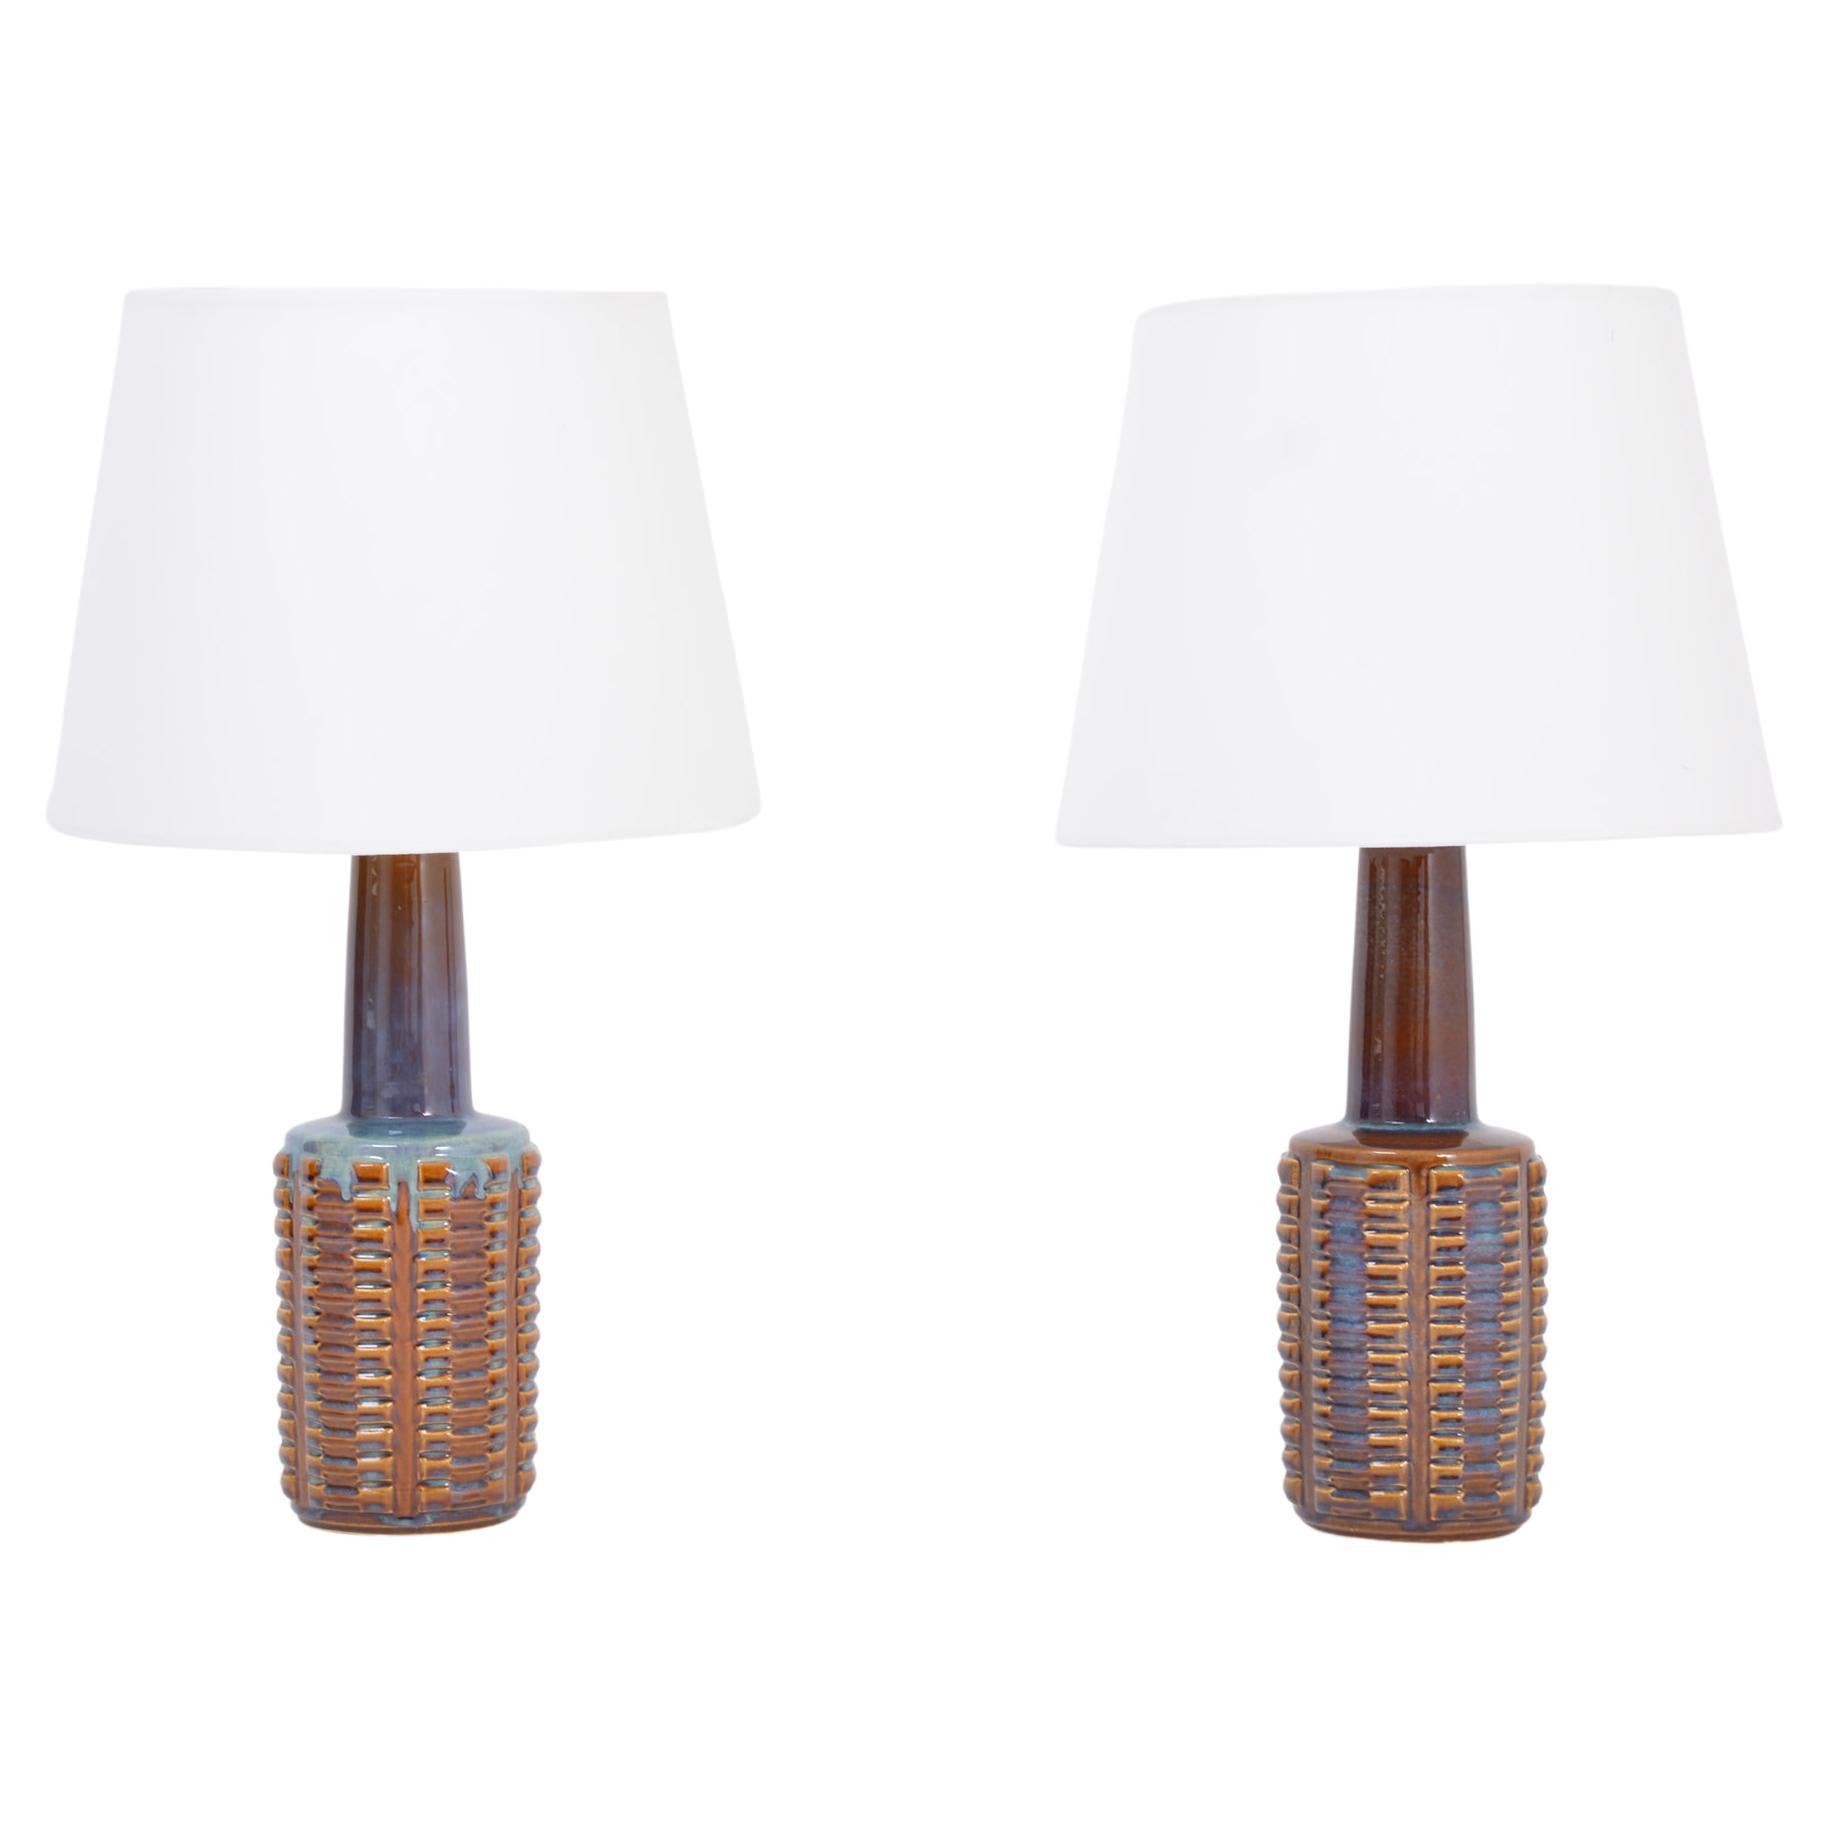 Pair of Tall Mid-Century Modern Ceramic Table Lamps by Einar Johansen for Soholm